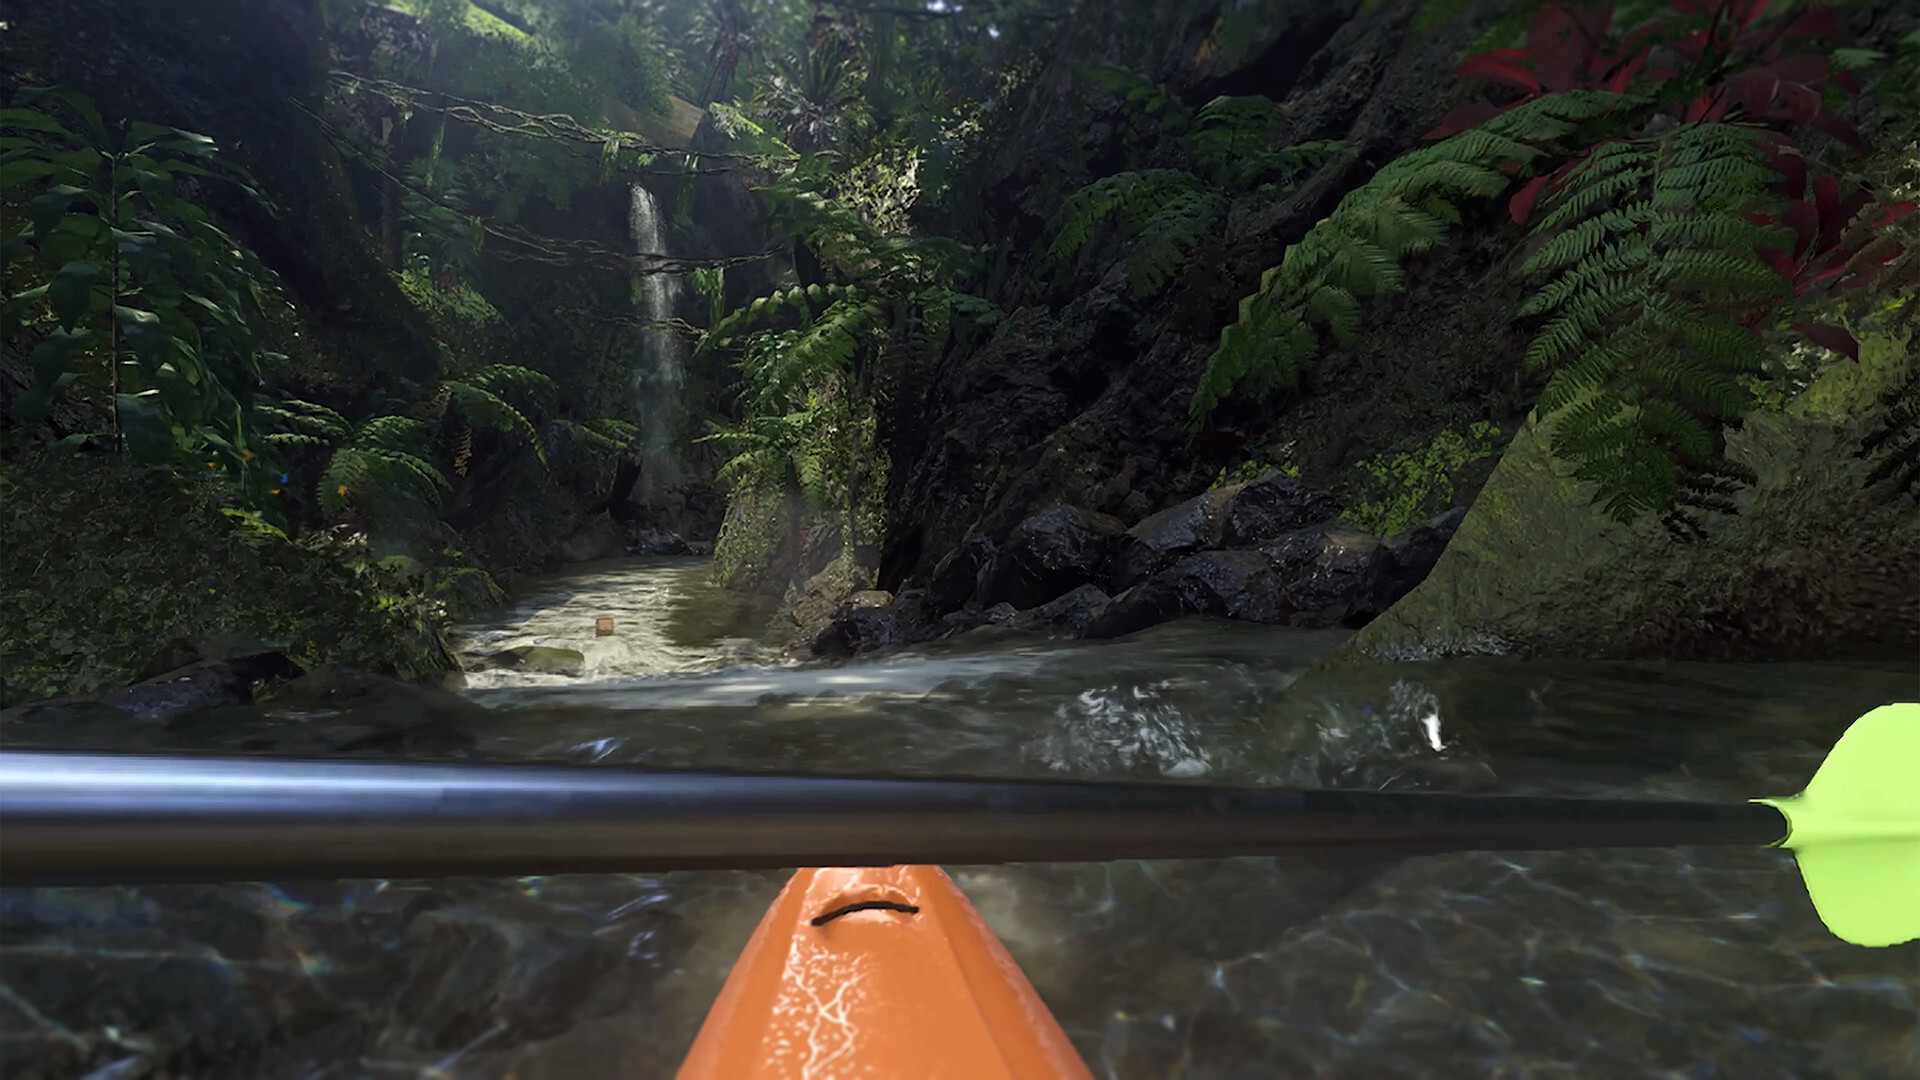 A tropical waterway with a waterfall ahead, walls of foliage, and the paddle and bow of a kayak facing downstream